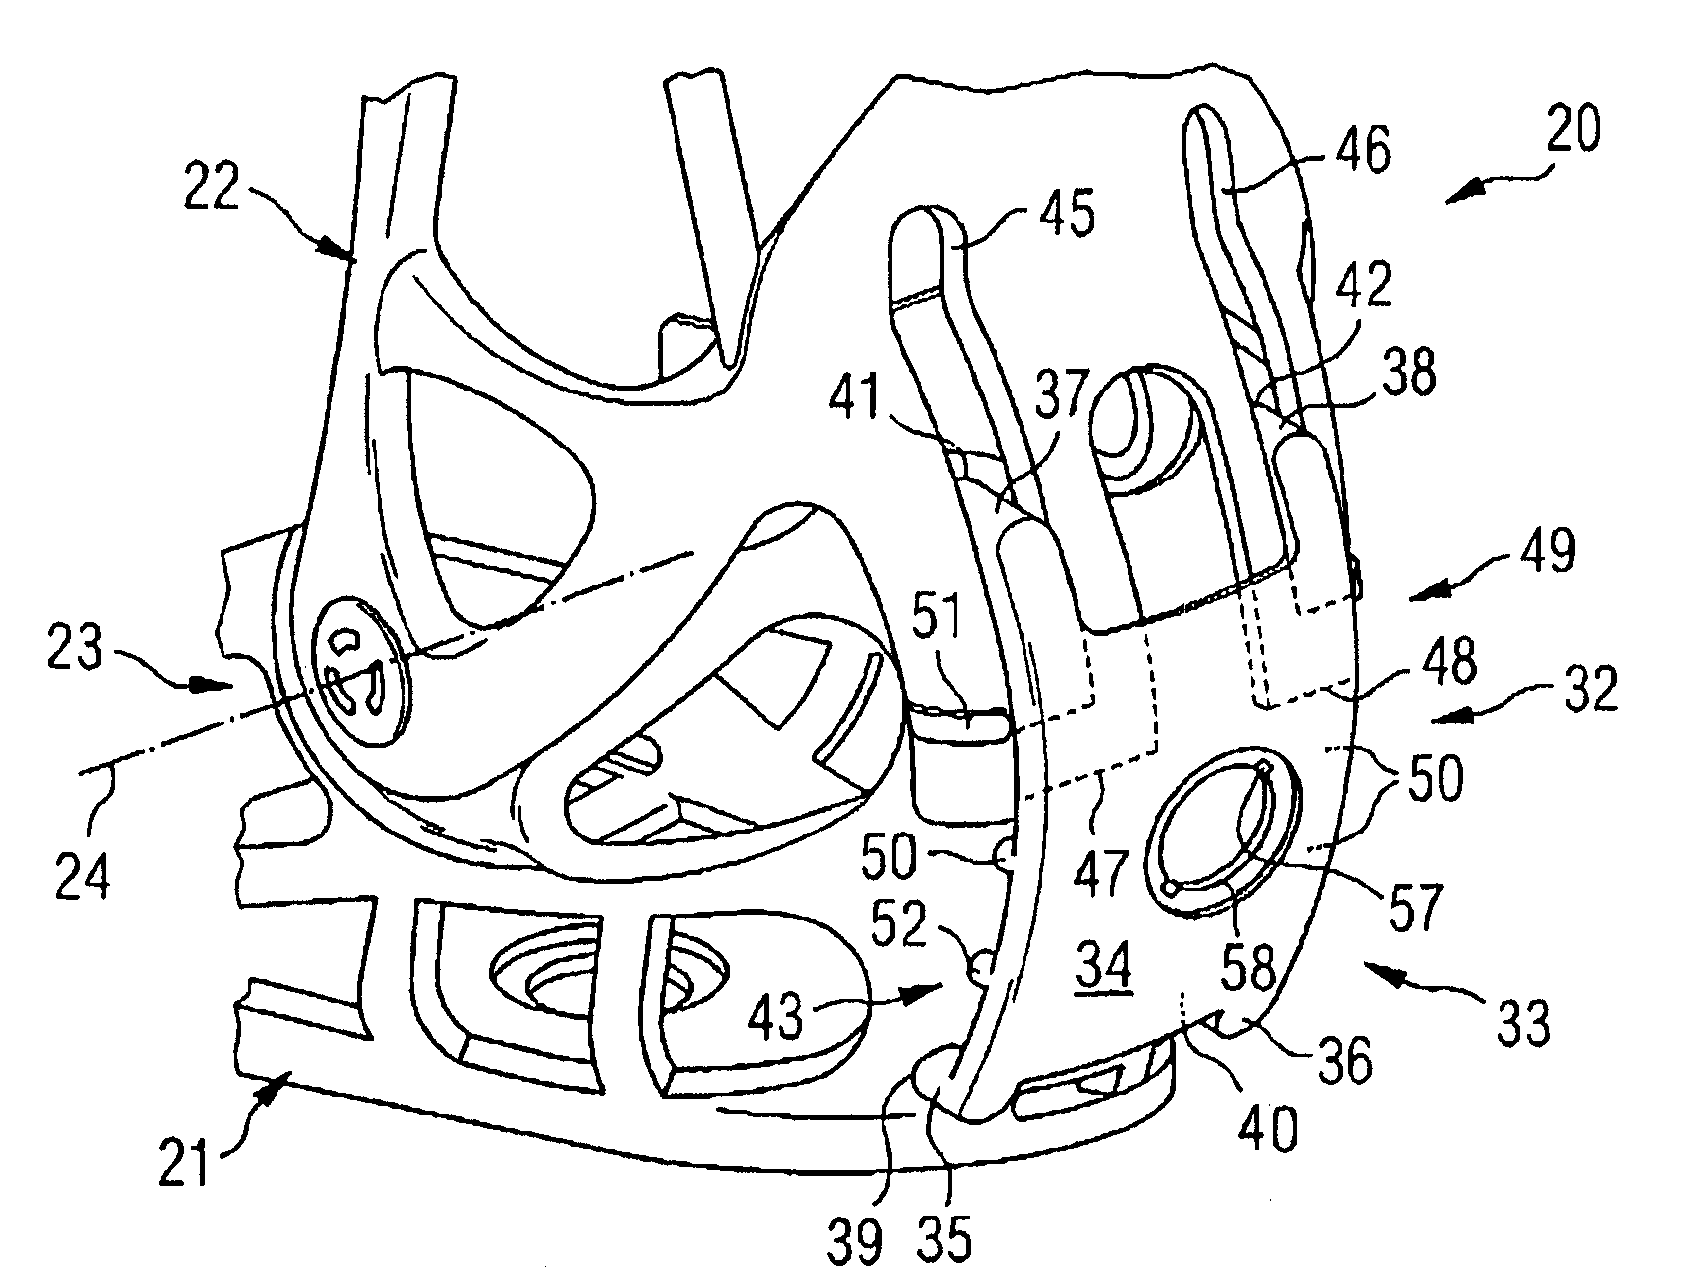 Casing structure for fixing and containing shank